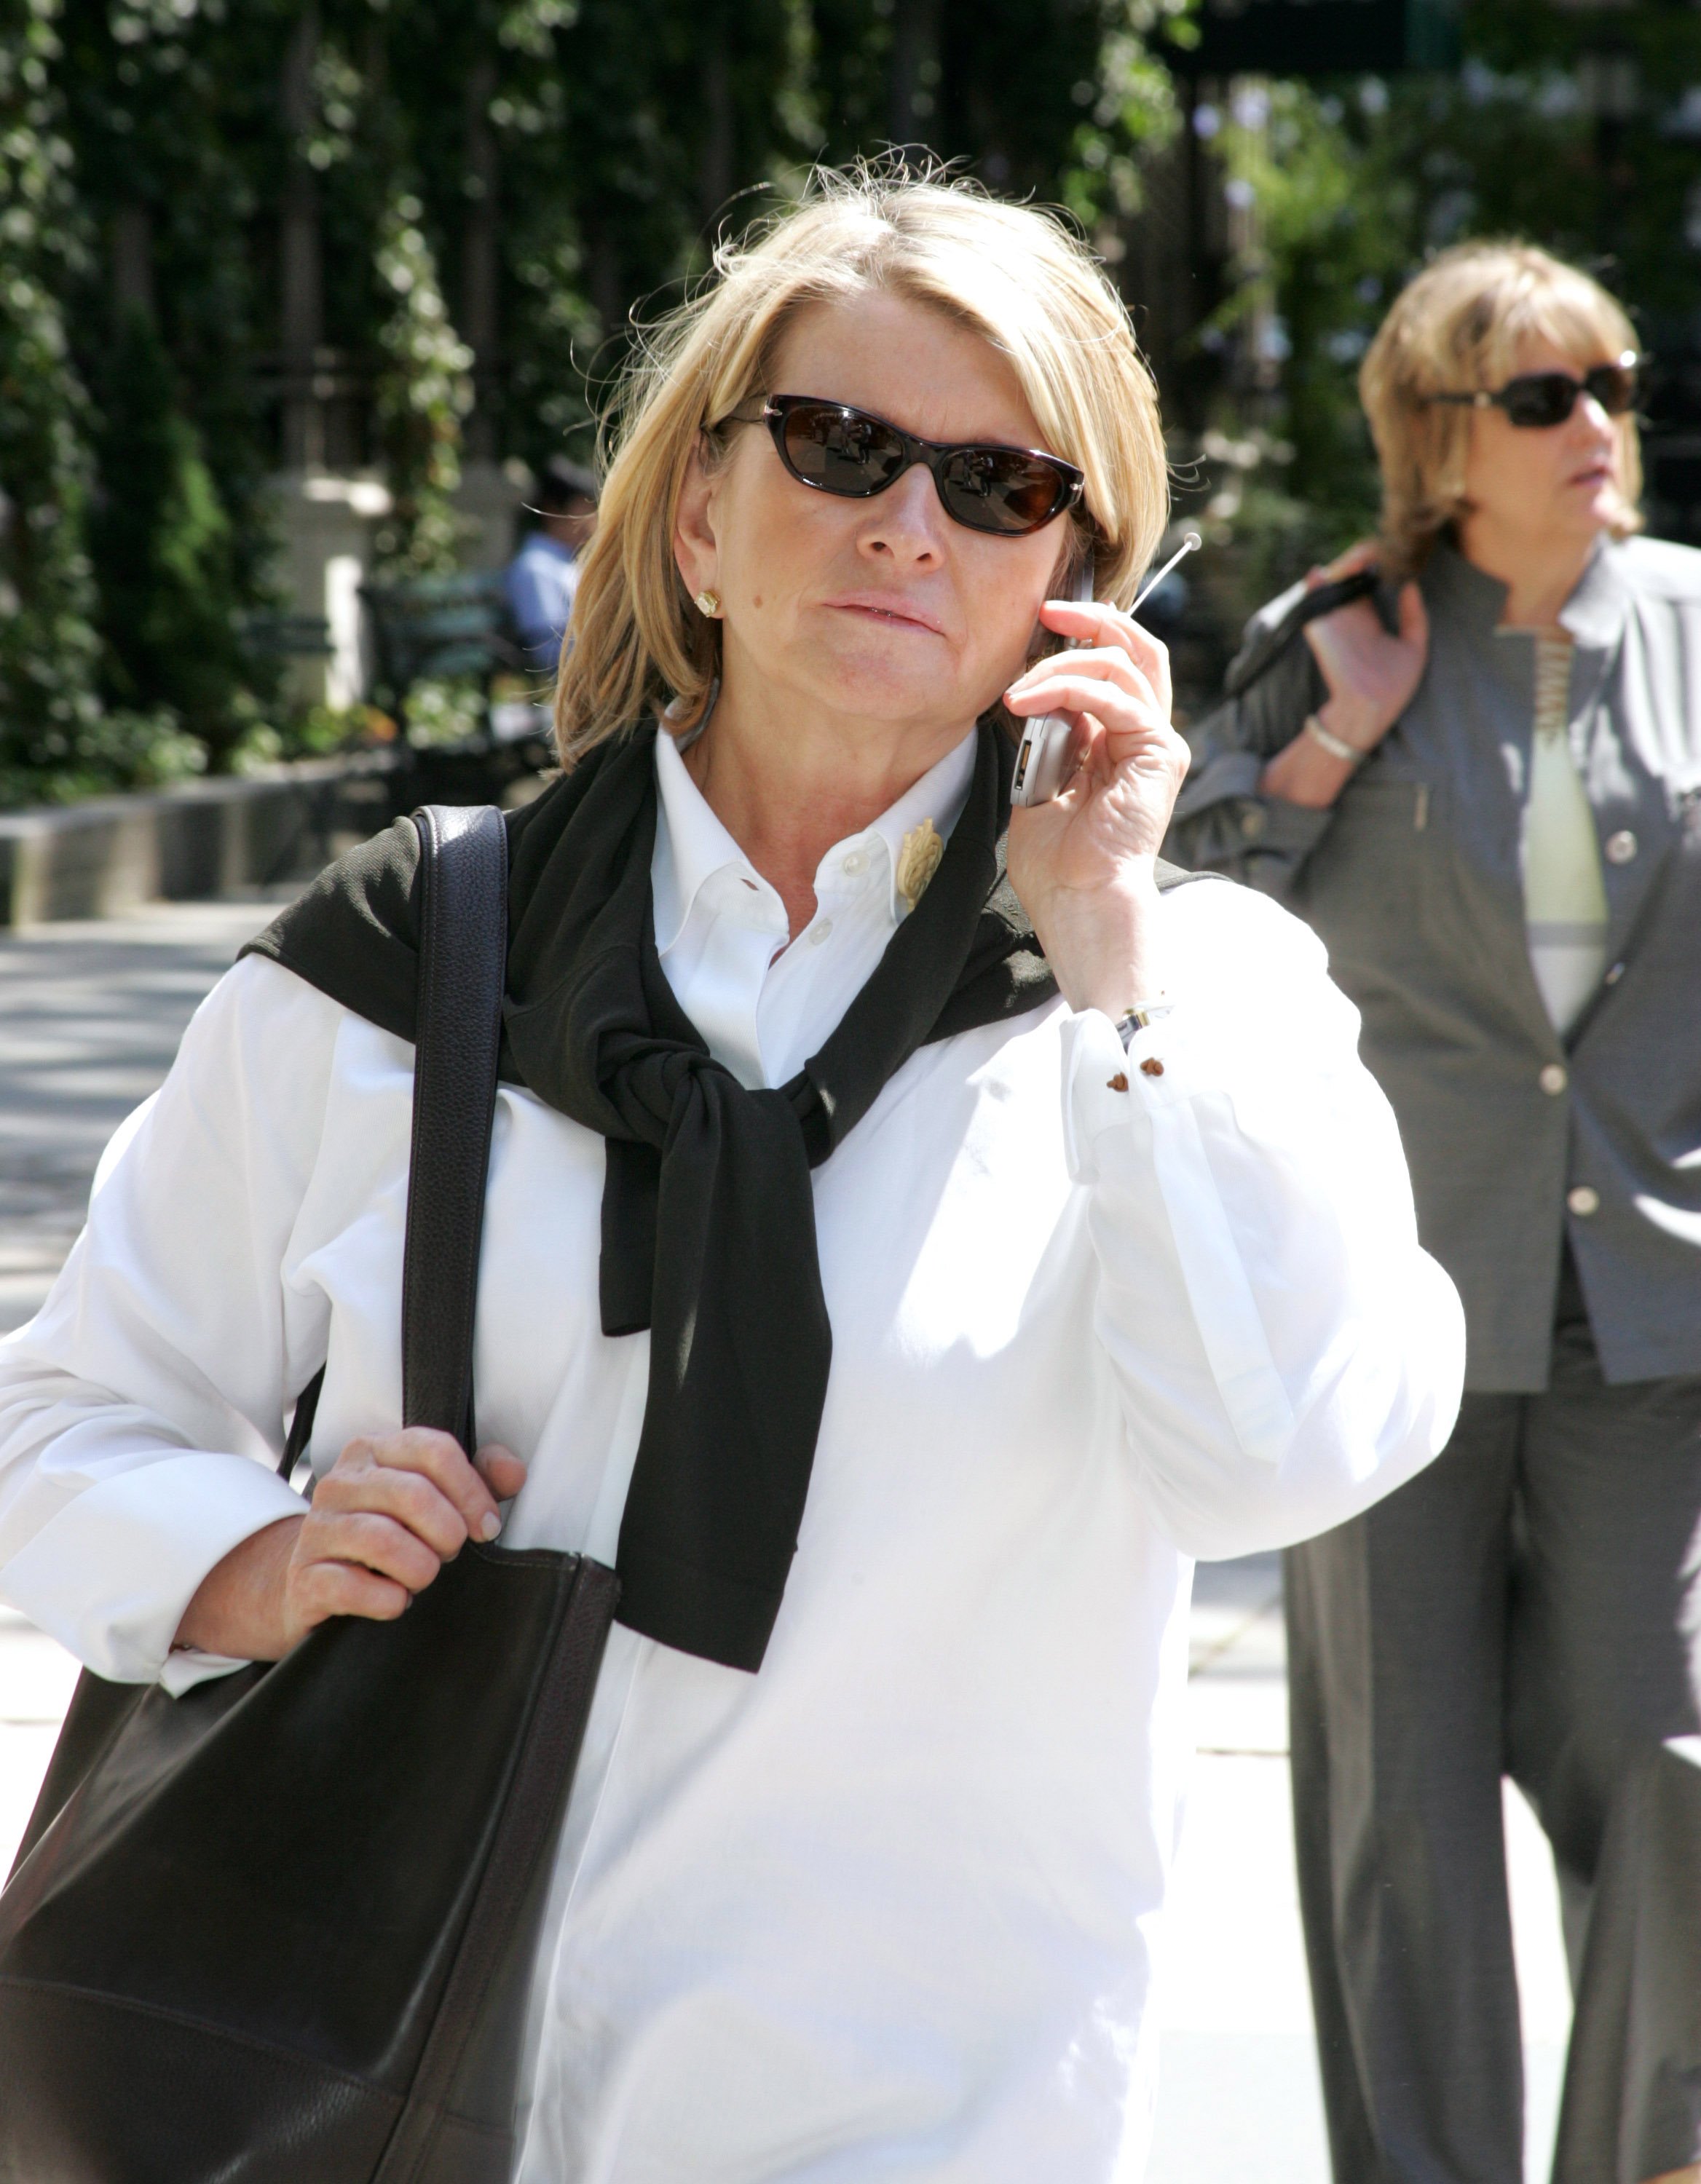 Martha Stewart was Sighted in New York City on June 2, 2004, Outside ILO and the Bryant Park Hotel in New York City. | Source: Getty Images